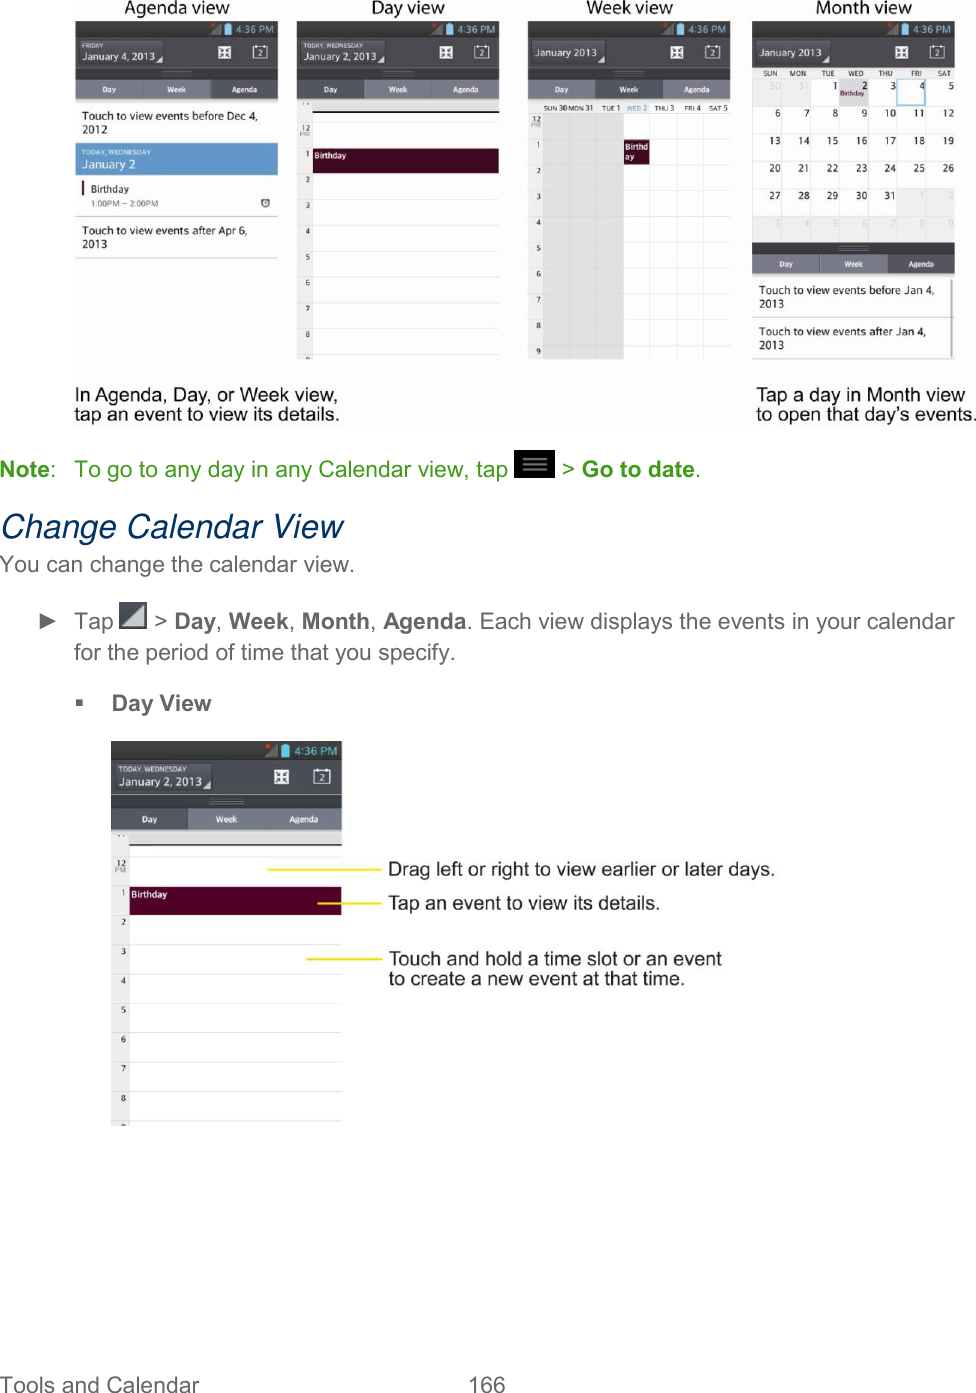  Tools and Calendar  166    Note:   To go to any day in any Calendar view, tap   &gt; Go to date. Change Calendar View You can change the calendar view. ►  Tap   &gt; Day, Week, Month, Agenda. Each view displays the events in your calendar for the period of time that you specify.  Day View     